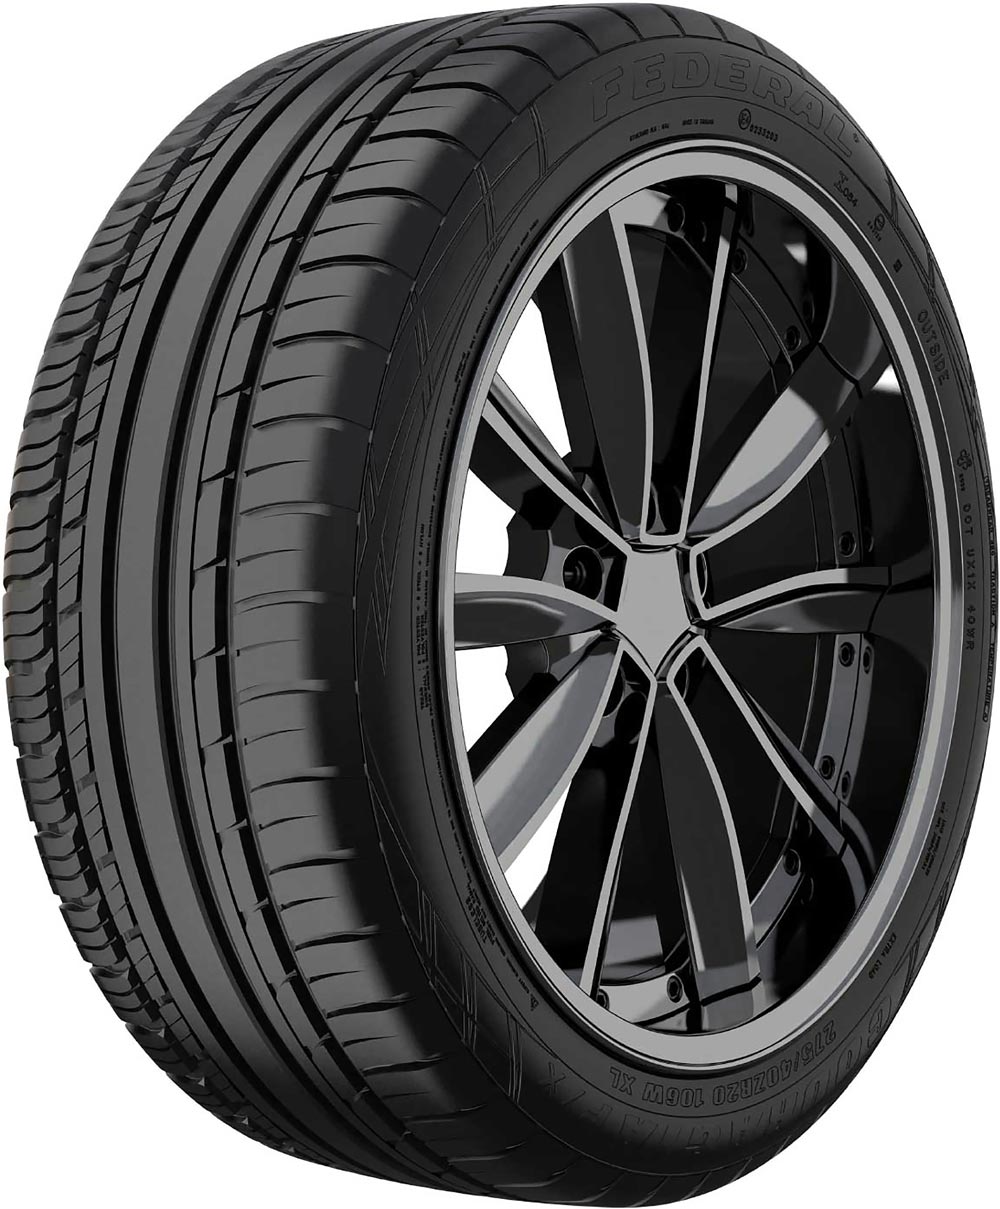 Anvelope jeep FEDERAL COURAGIA X (DOT2018) 275/55 R19 111V